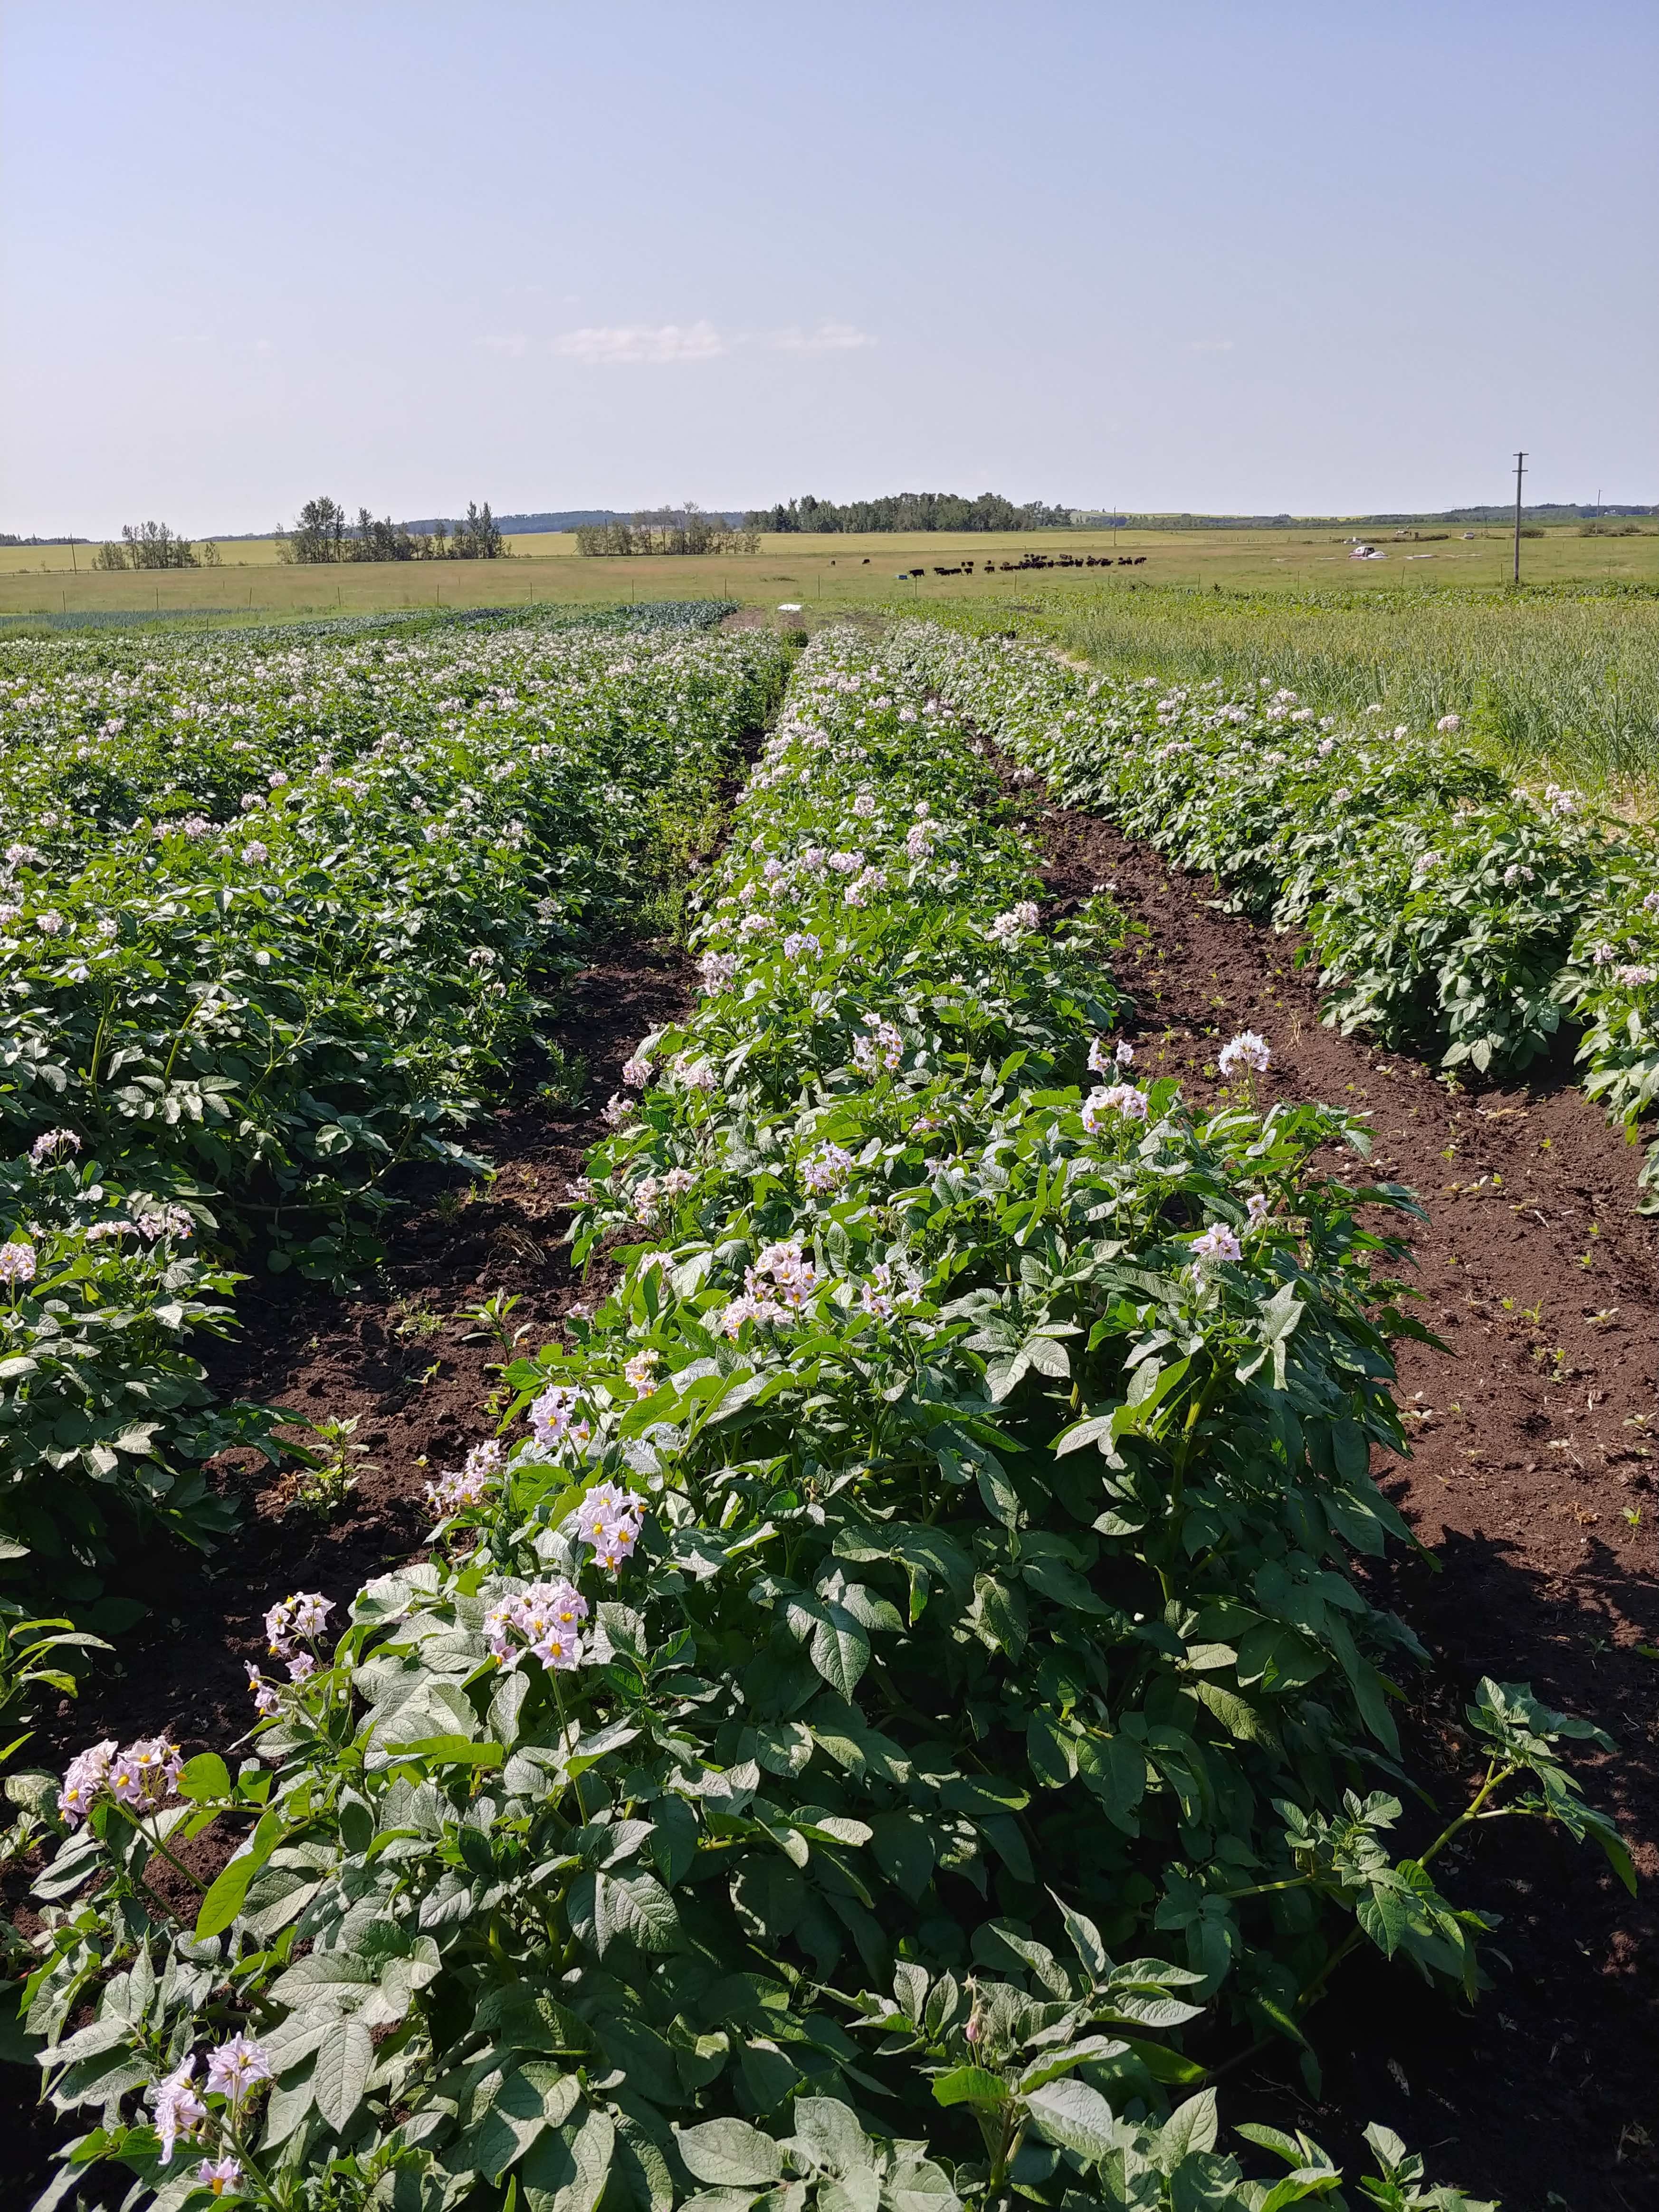 Previous Happening: August 5th - Farm Happenings - Potatoes and Beef